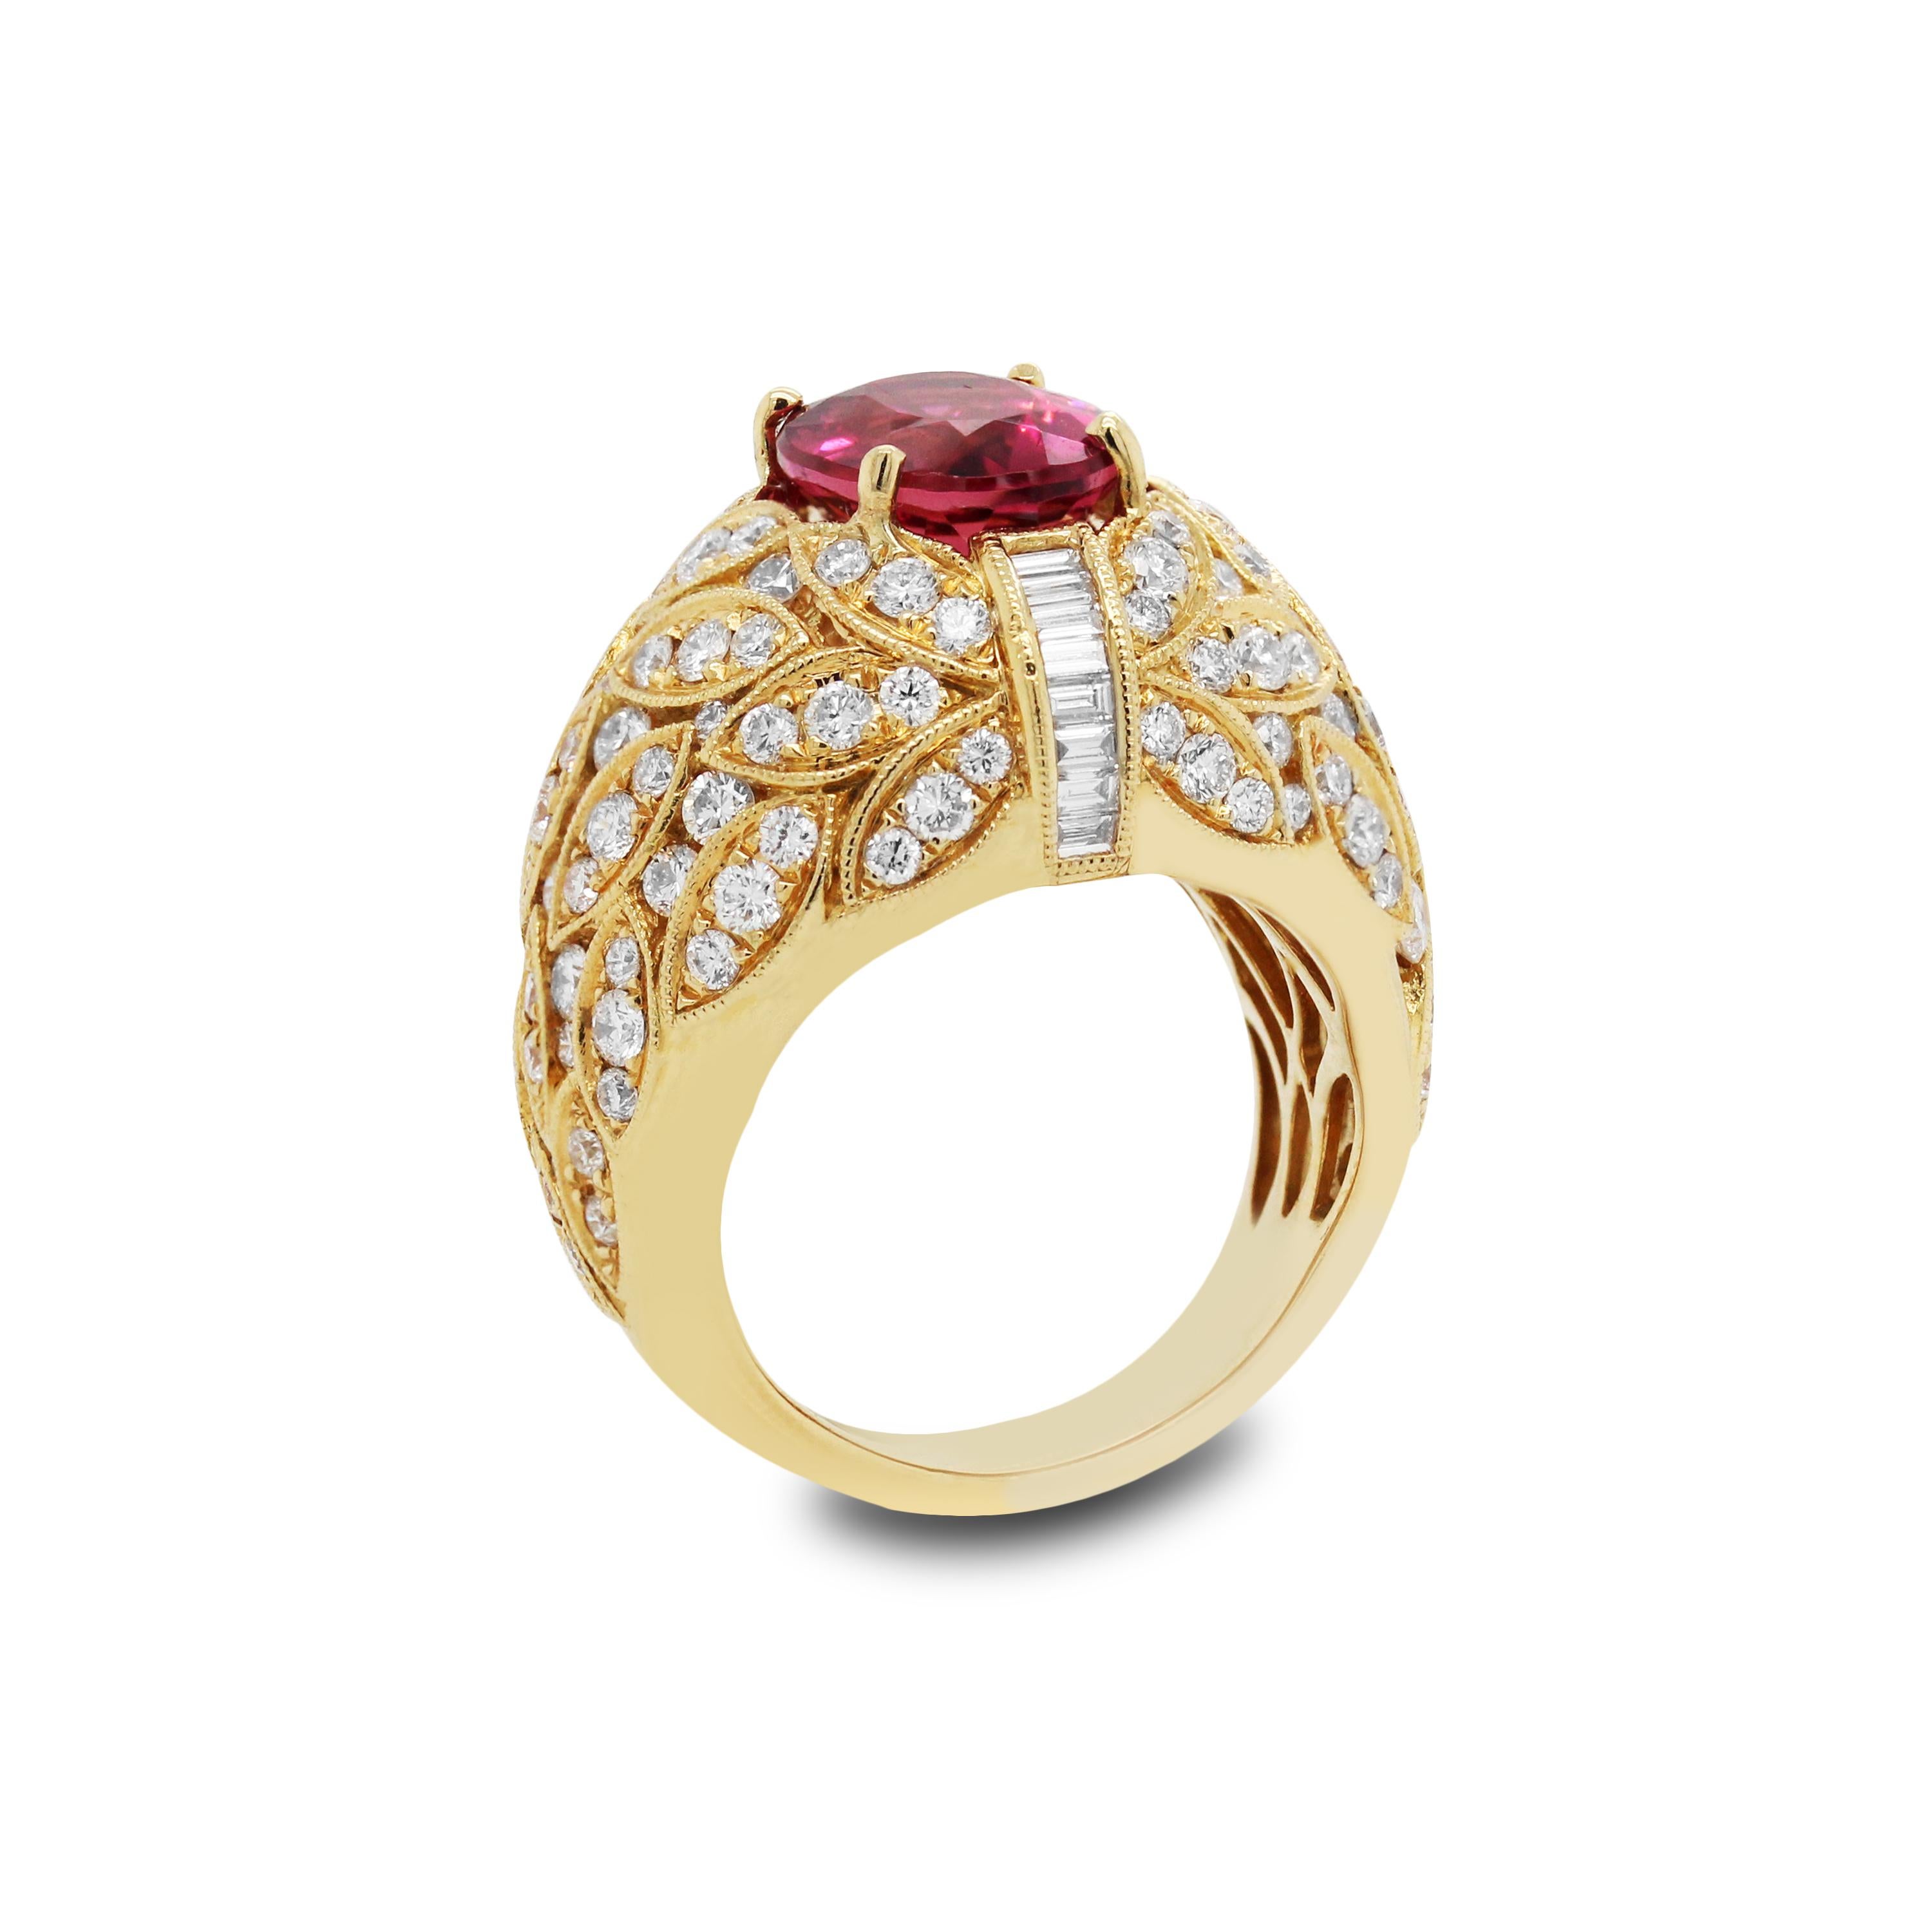 18K Yellow Gold and Diamond Ring with Rubellite Tourmaline Center

Truly remarkable Rubellite Tourmaline center. Exceptional color and quality. 3.93 carat.

4 carat apprx. in diamonds. Round and baguette cuts.

Ring face is 0.75 inch in width
0.50